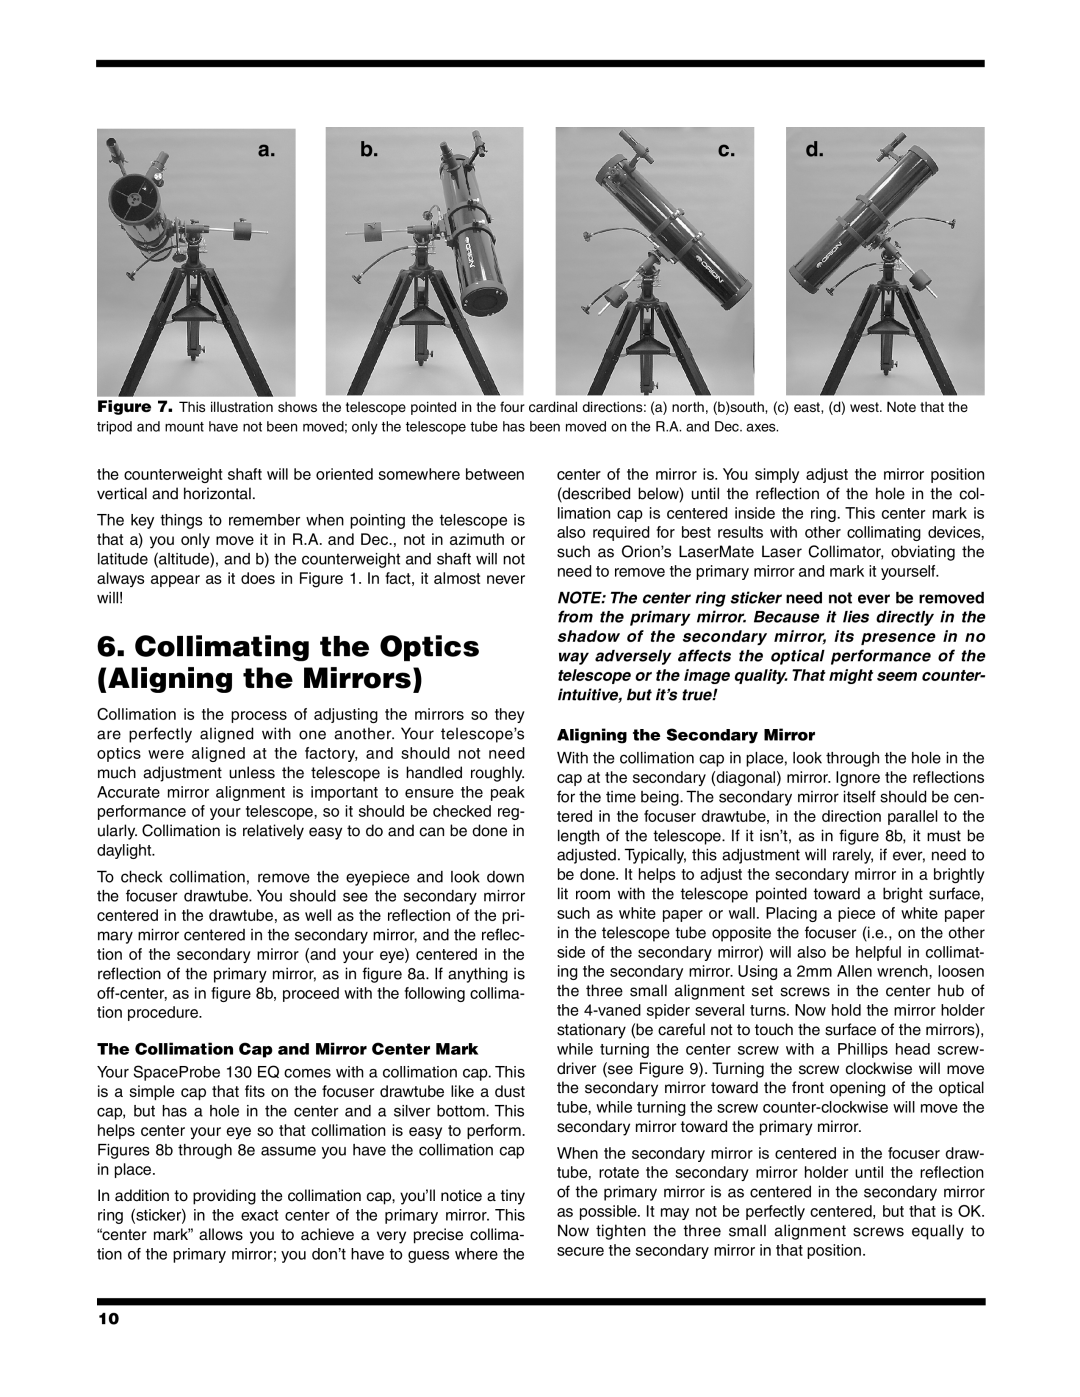 Orion 9851 instruction manual Collimating the Optics Aligning the Mirrors, The Collimation Cap and Mirror Center Mark 